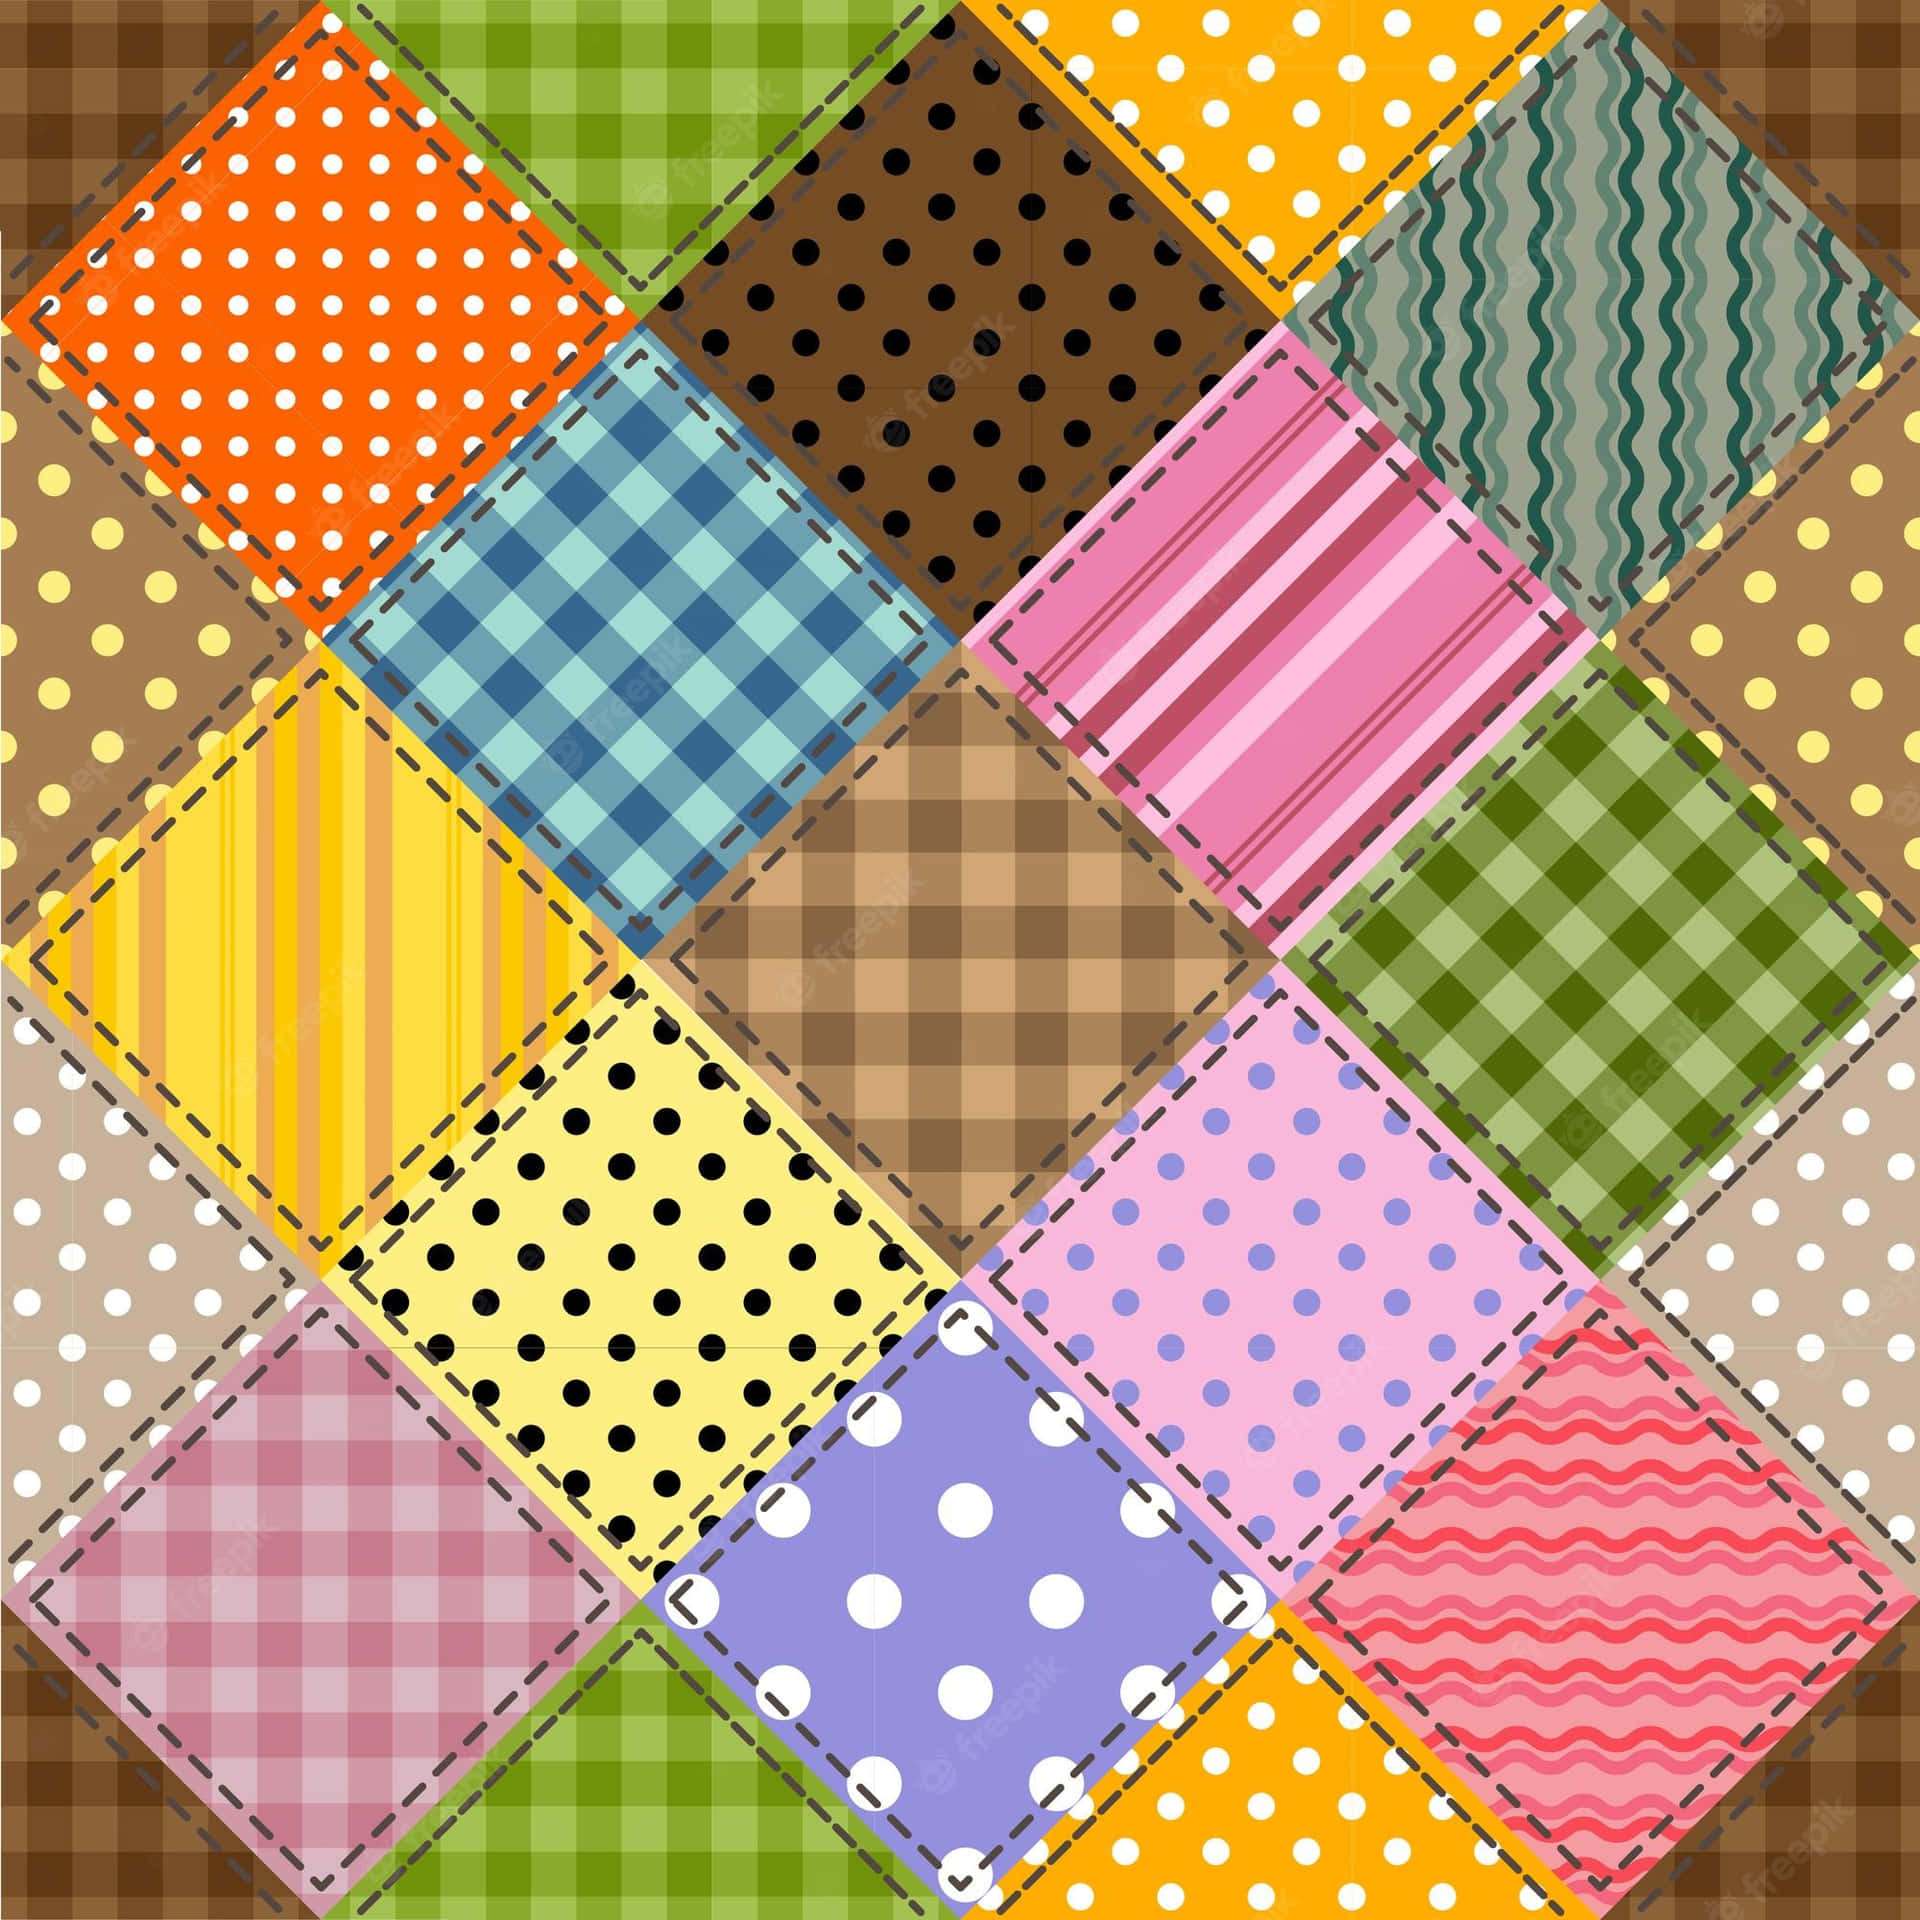 Snuggle Up with a Quilt Wallpaper